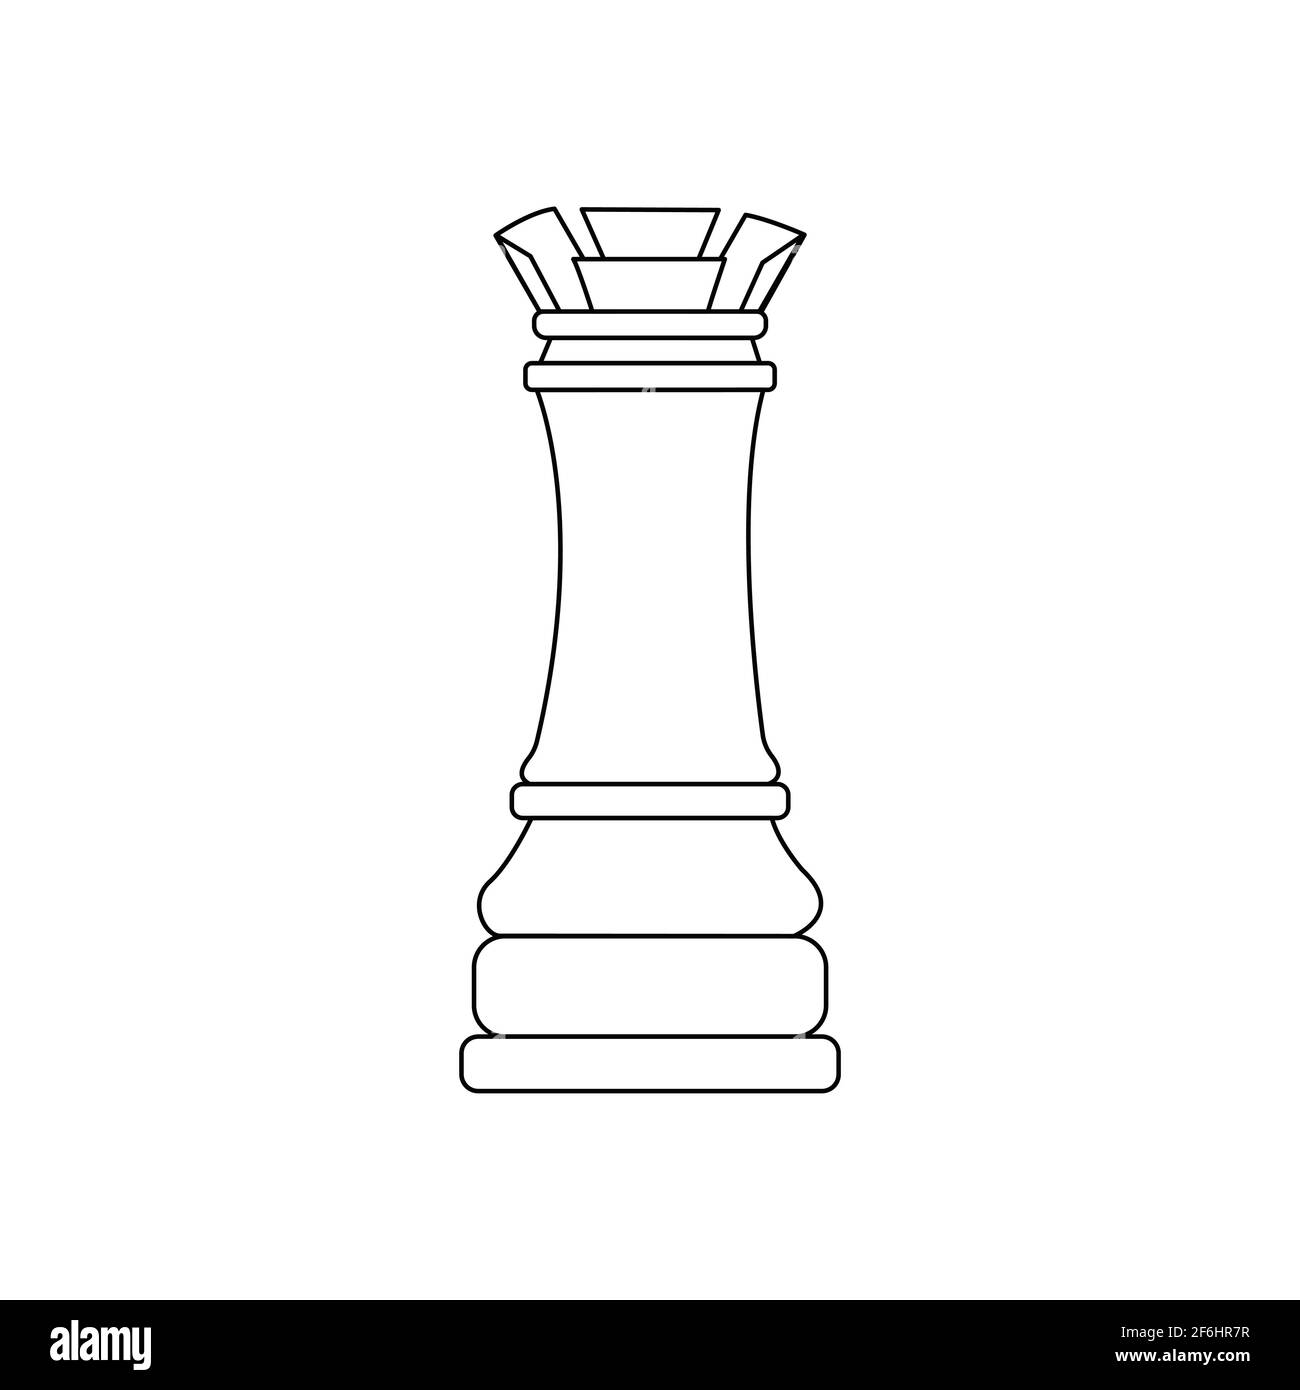 Isolated rook chess piece icon Royalty Free Vector Image